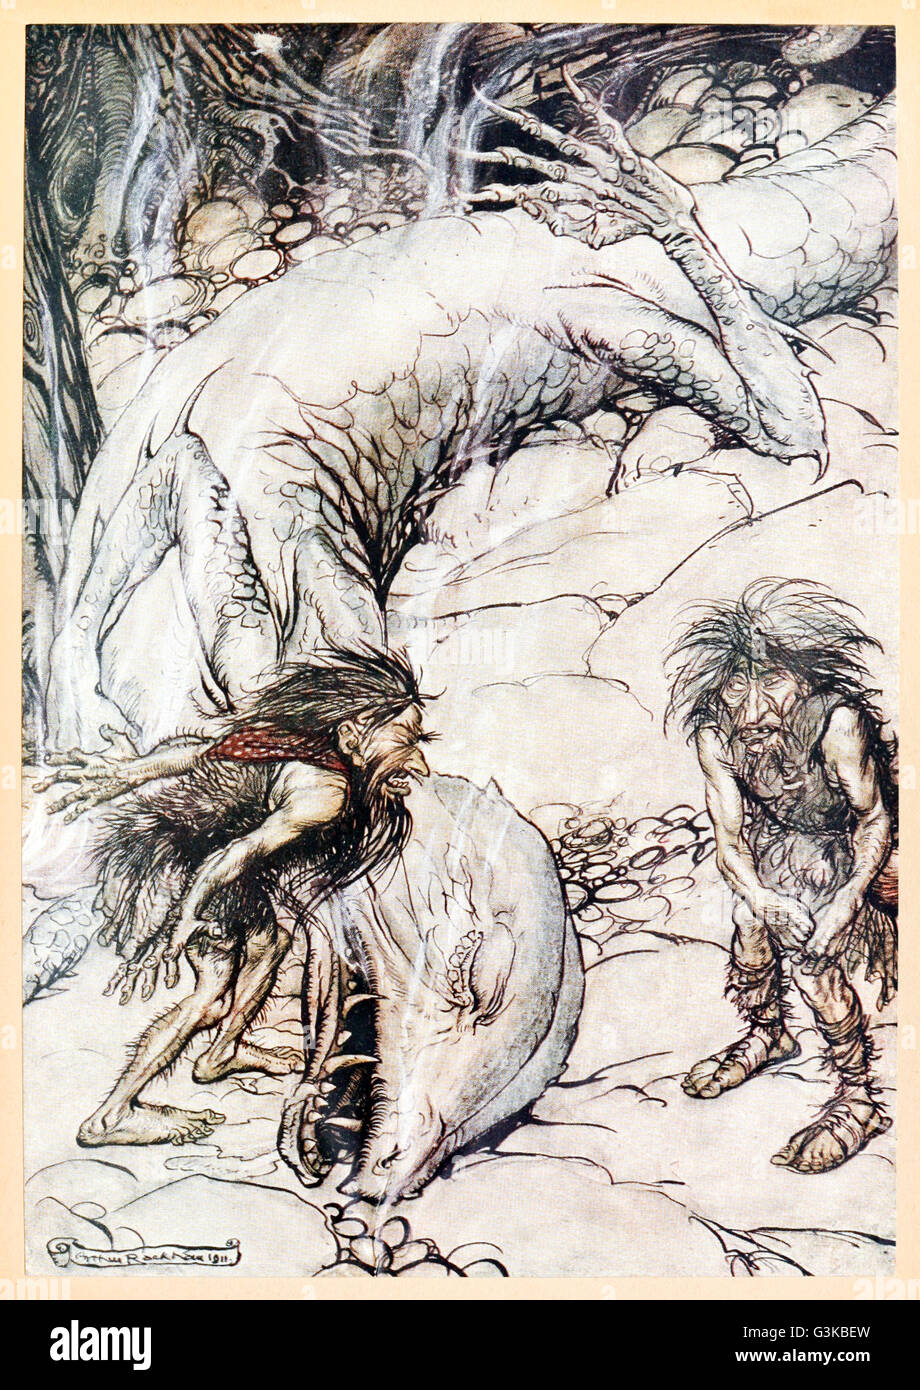 “The dwarfs quarreling over the body of Father” from 'Siegfried & The Twilight of the Gods' illustrated by Arthur Rackham (1867-1939). See description for more information. Stock Photo